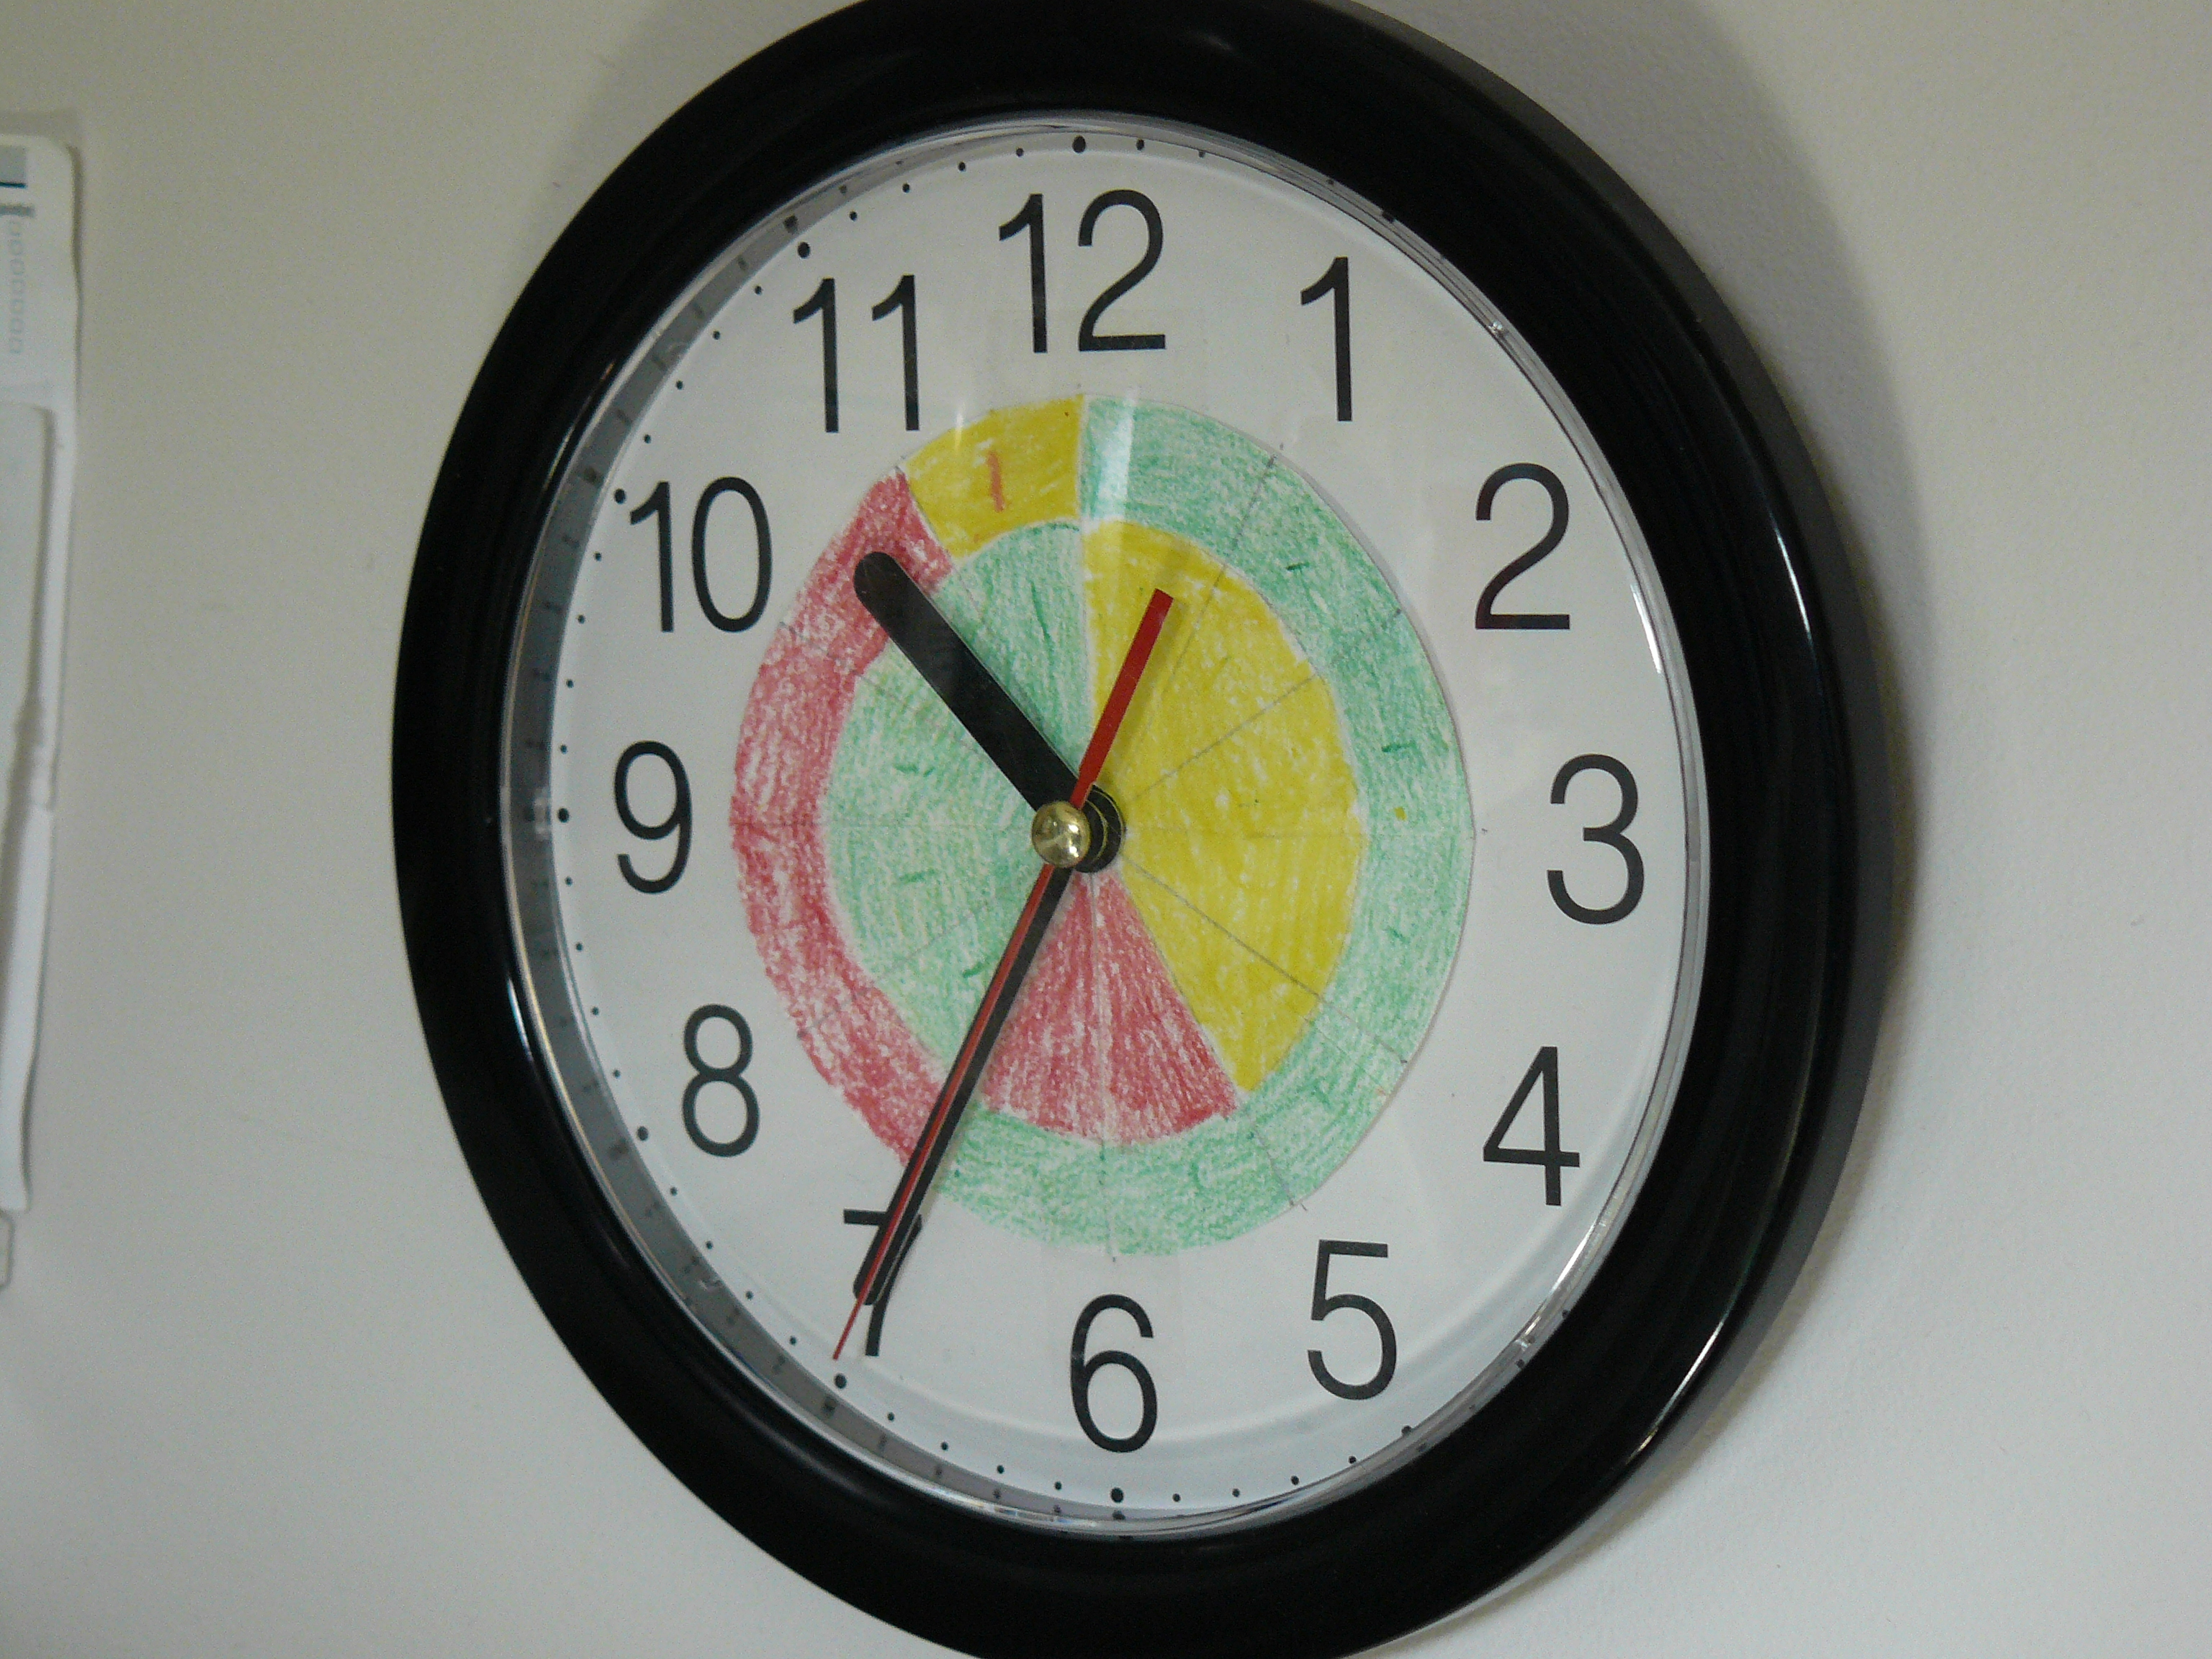 Picture of a clock with colour coded sections indicating the current Time of Use period.